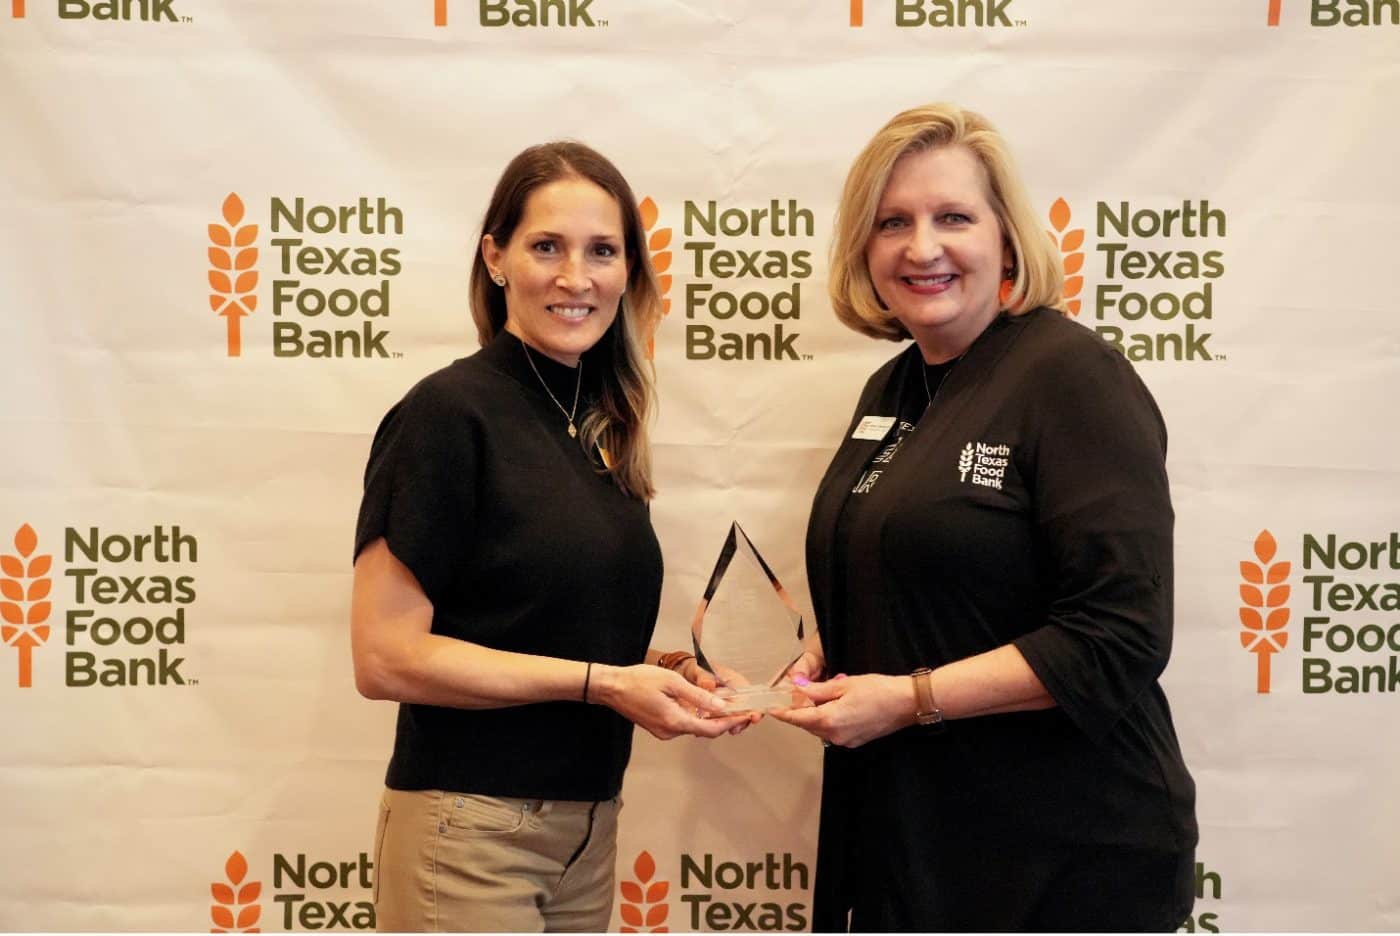 Fidelity Investments Employees Celebrate Silver Anniversary With $171,000  Donation! – Utah Food Bank